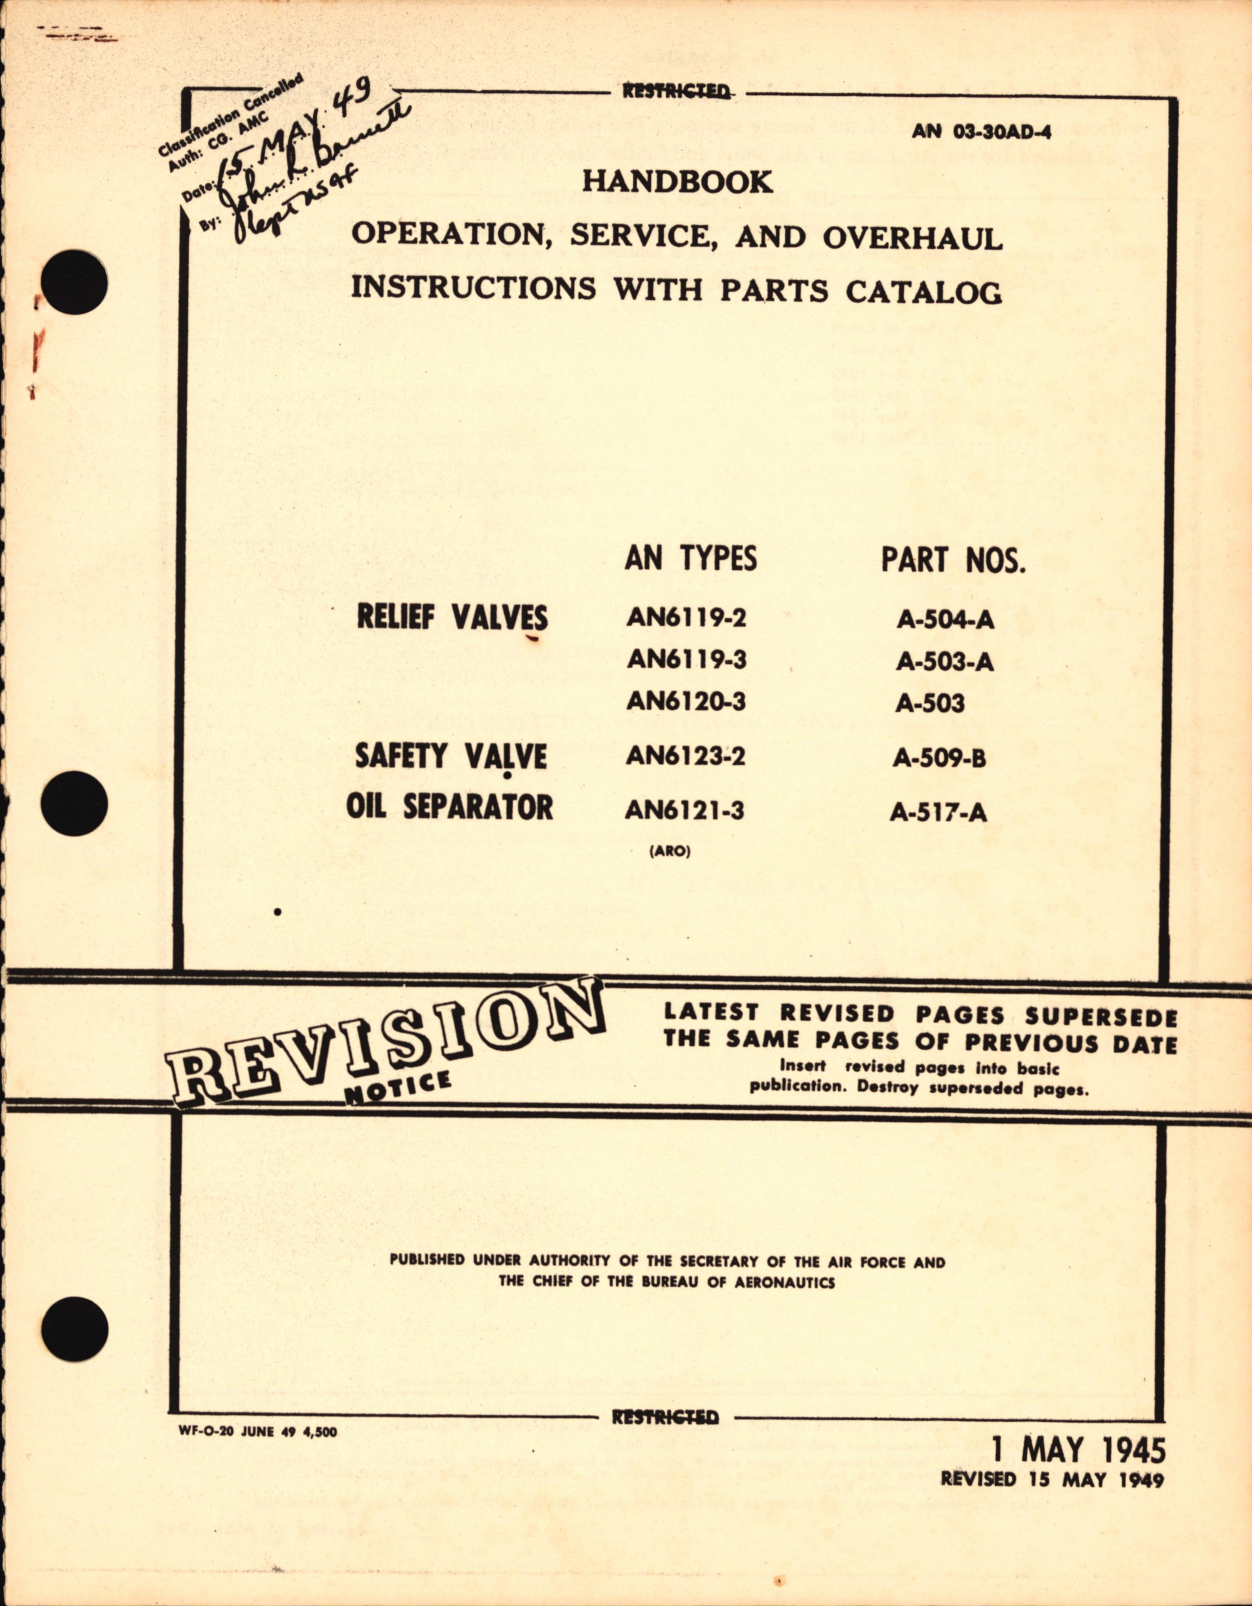 Sample page 1 from AirCorps Library document: Handbook Operation, Service, and Overhaul Instructions with Parts Catalog for Relief Valves, Safety Valve and Oil Separator 